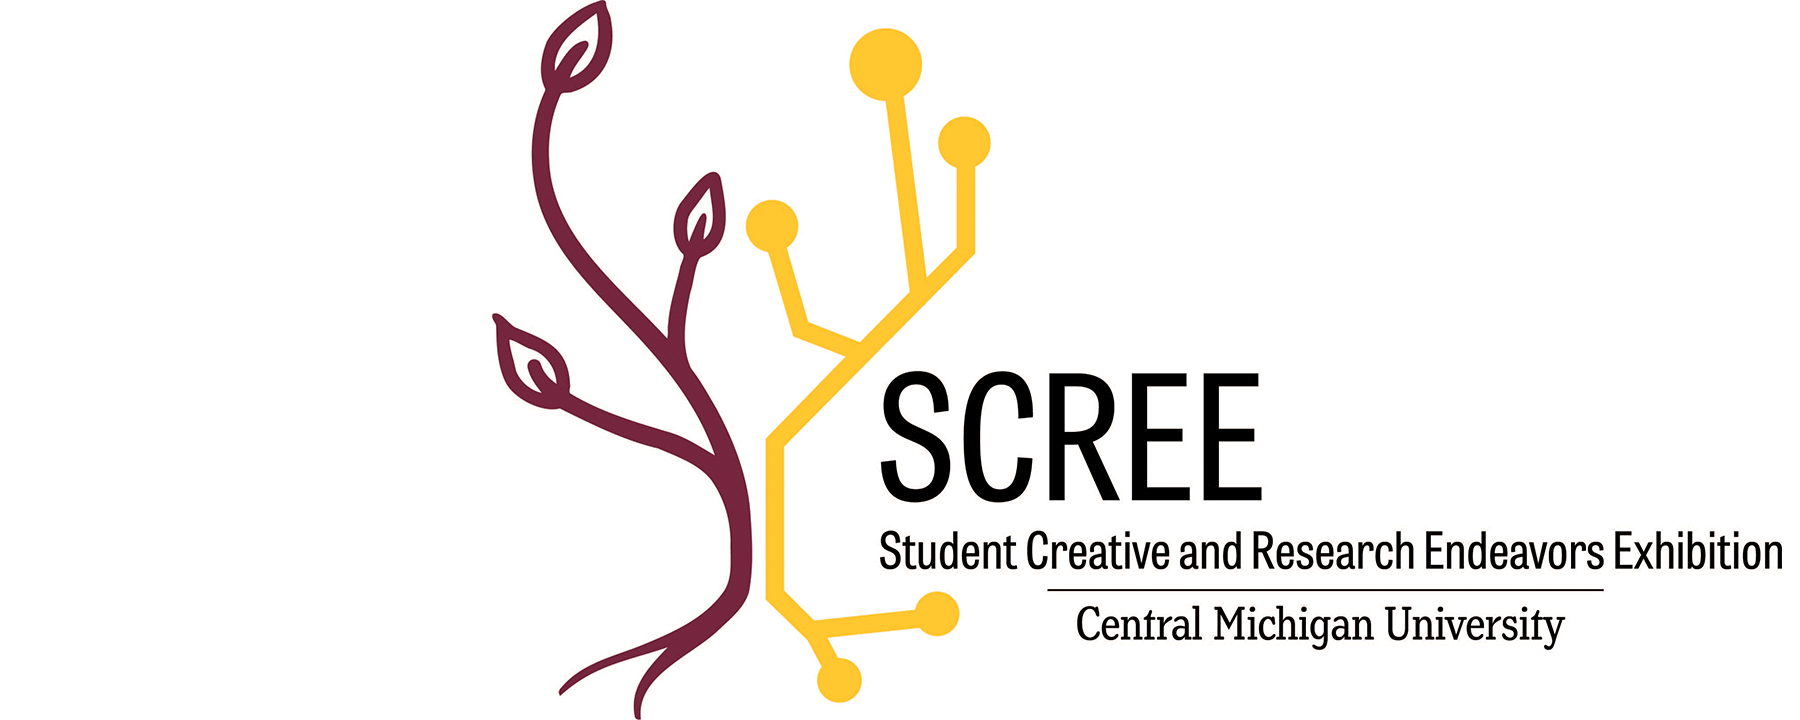 Student Creative and Research Endeavors Exhibition (SCREE) Logo.